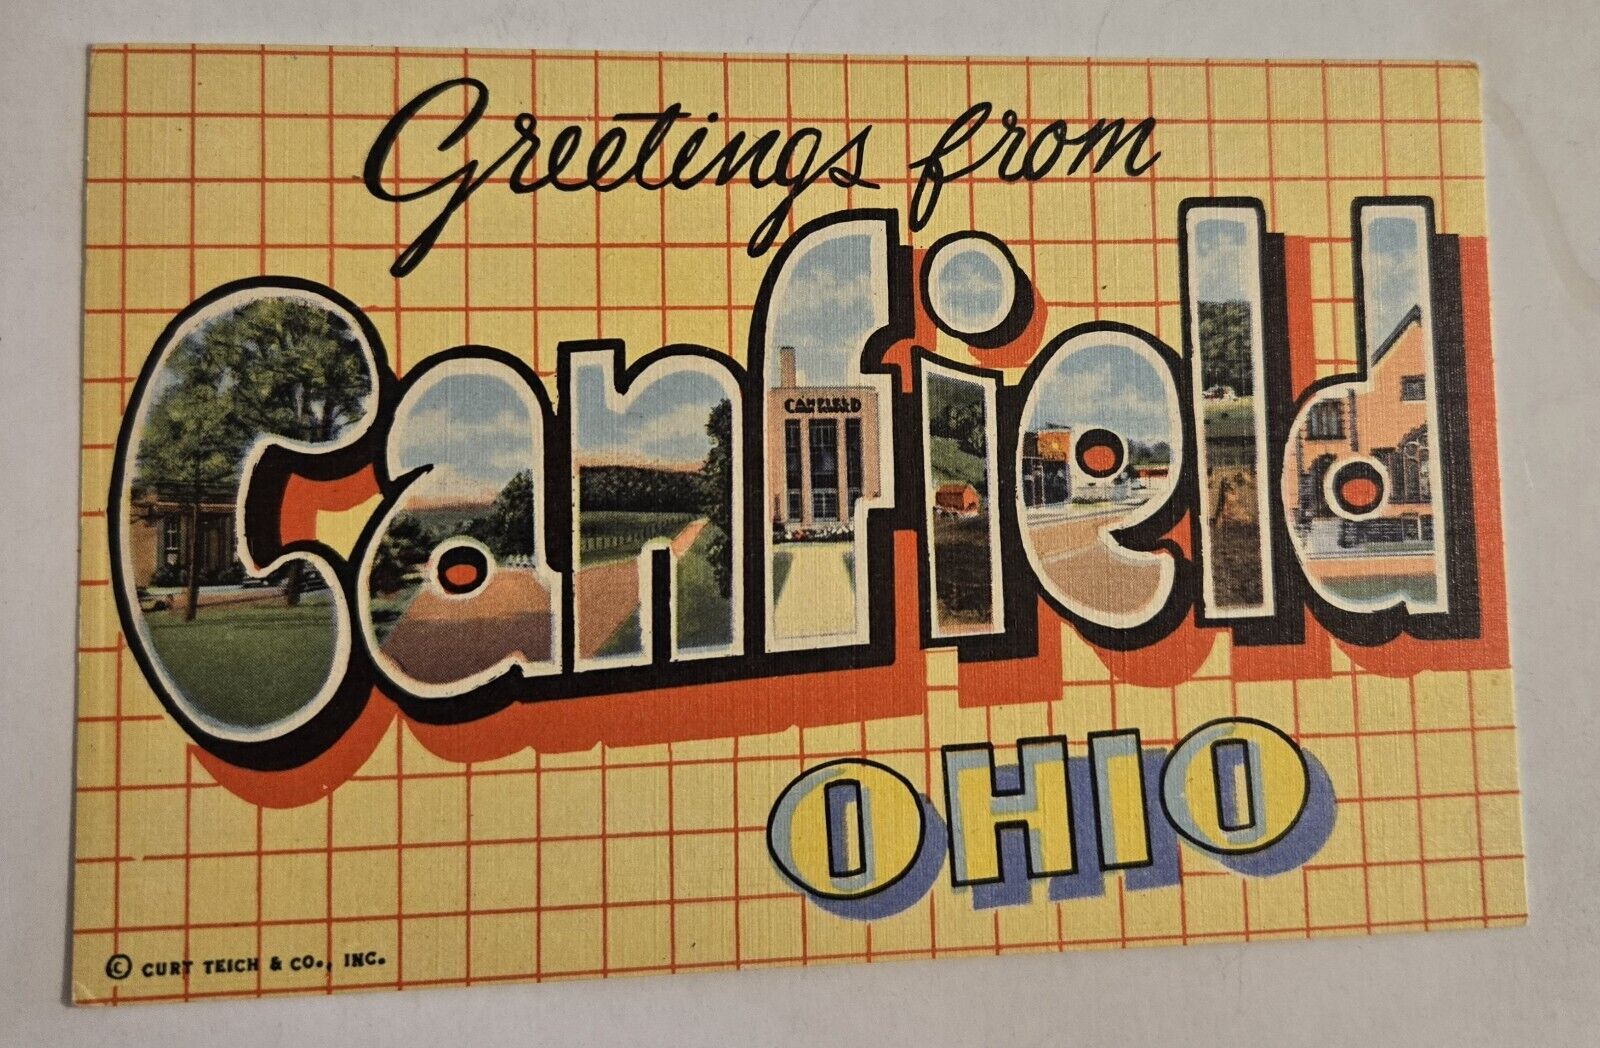 Unused LARGE LETTERS GREETINGS FROM Canfield OHIO CURT TEICH POSTCARD F21